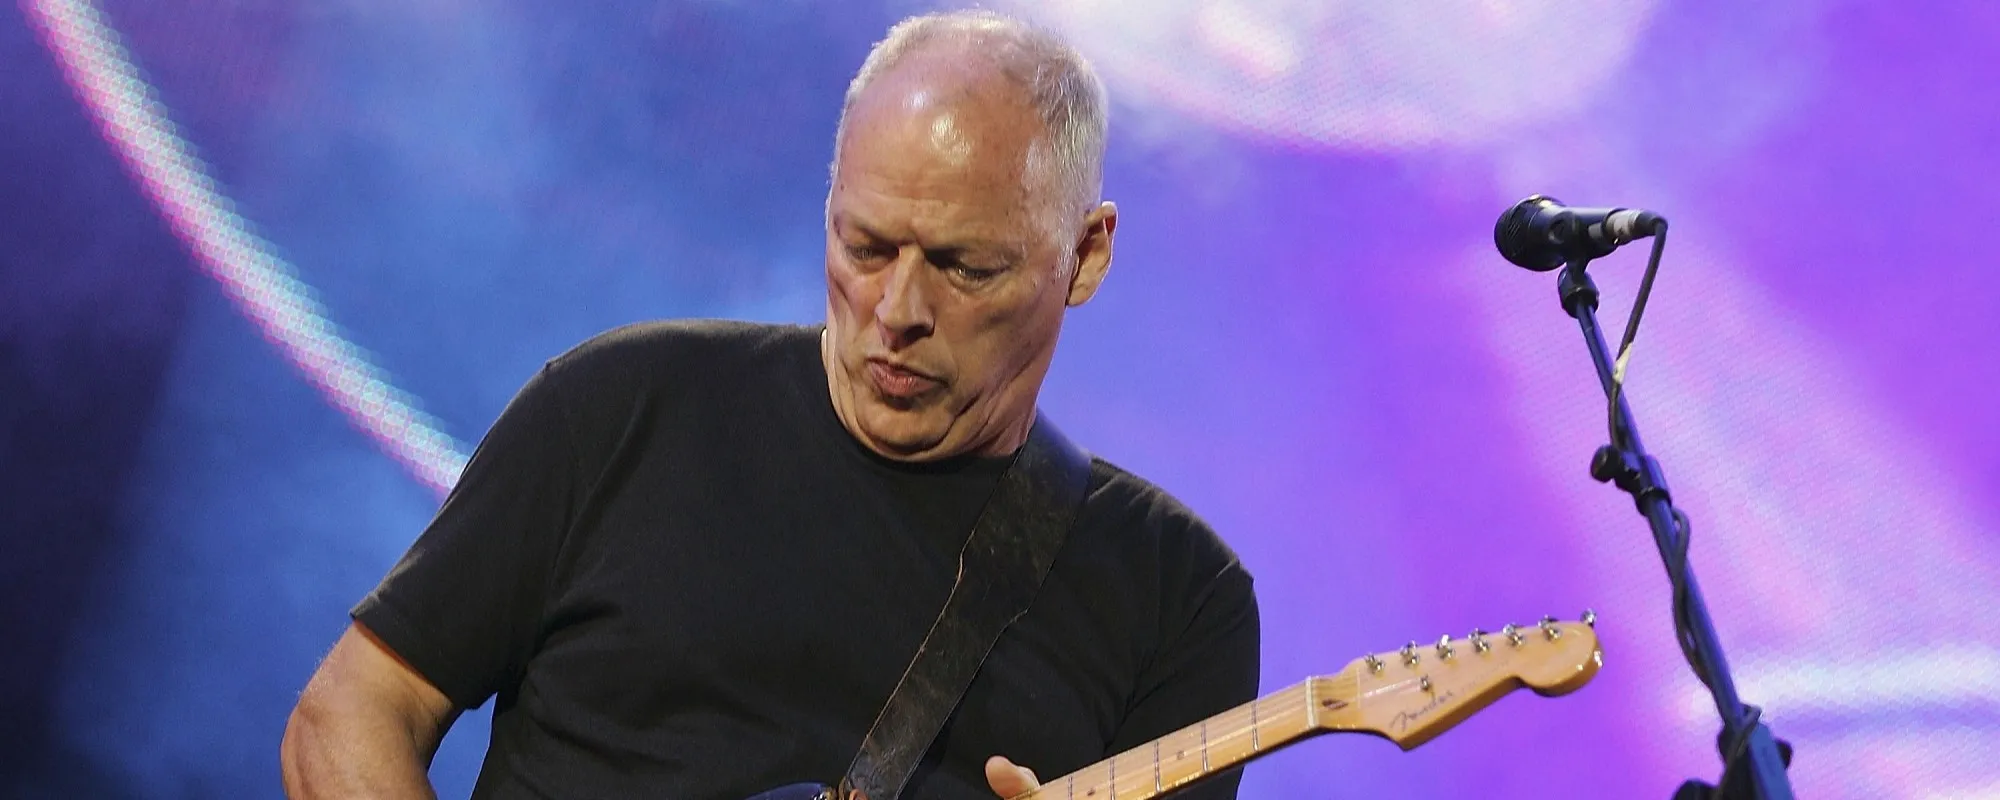 David Gilmour to Release First Solo Album in Nine Years, ‘Luck and Strange,’ Featuring His Family and Late Pink Floyd Bandmate Richard Wright